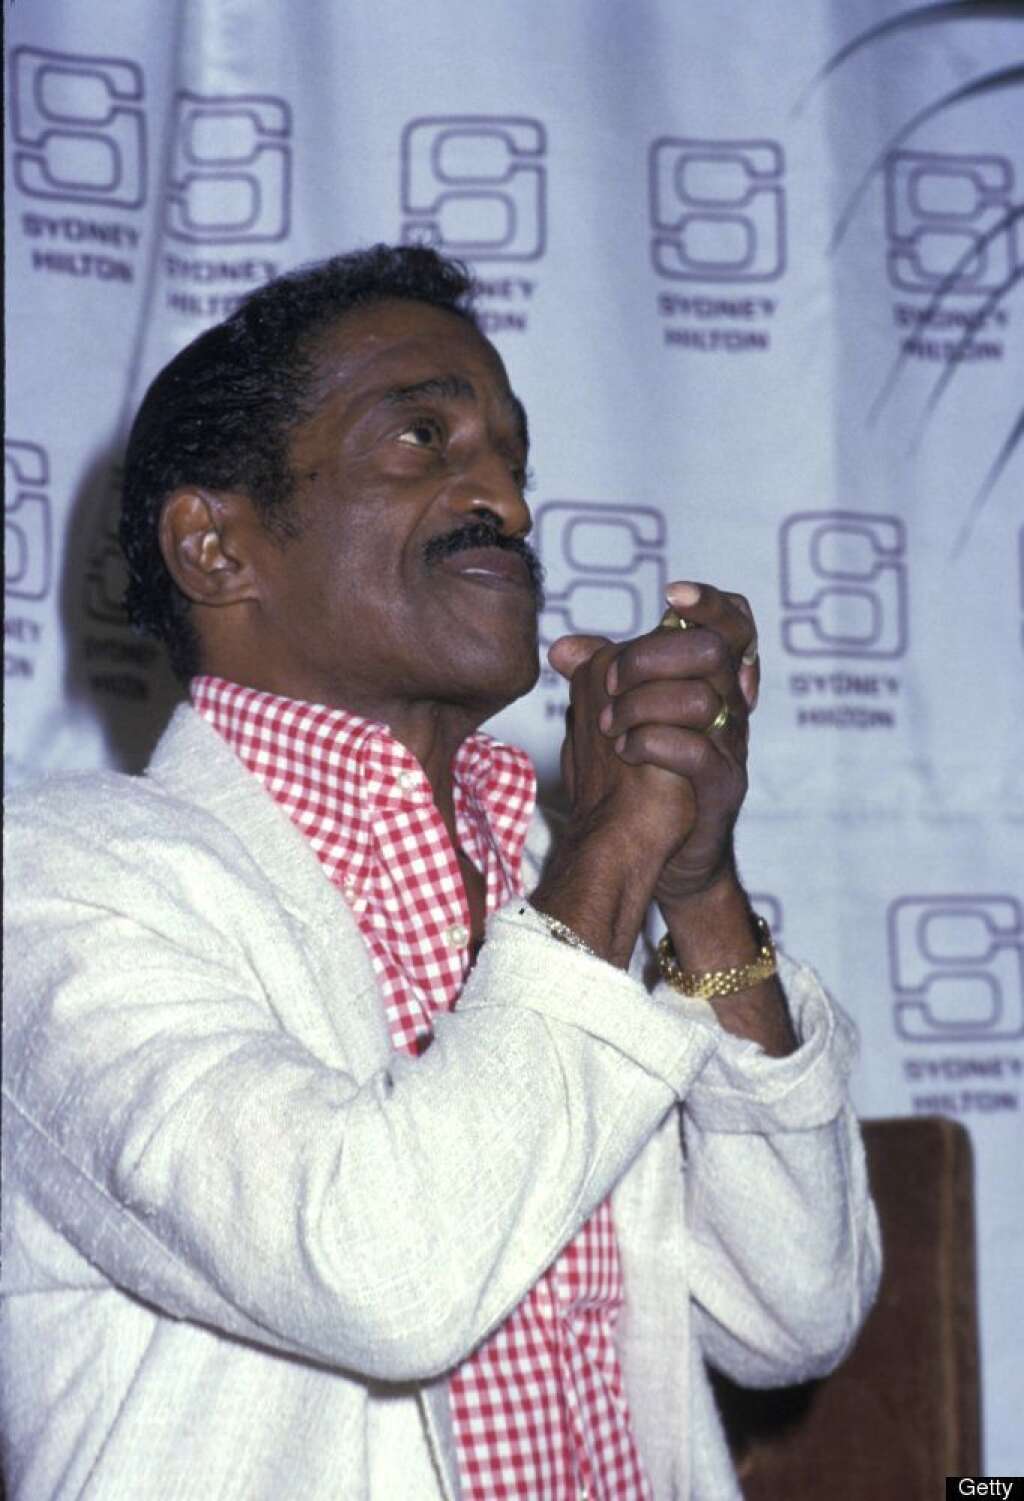 Sammy Davis, Jr. - Davis <a href="http://www.esquire.com/the-side/feature/destroyed-by-the-irs#ixzz1rYjZPHxQ" target="_hplink">owed nearly $7.5 million in back taxes</a> at the time of his death.